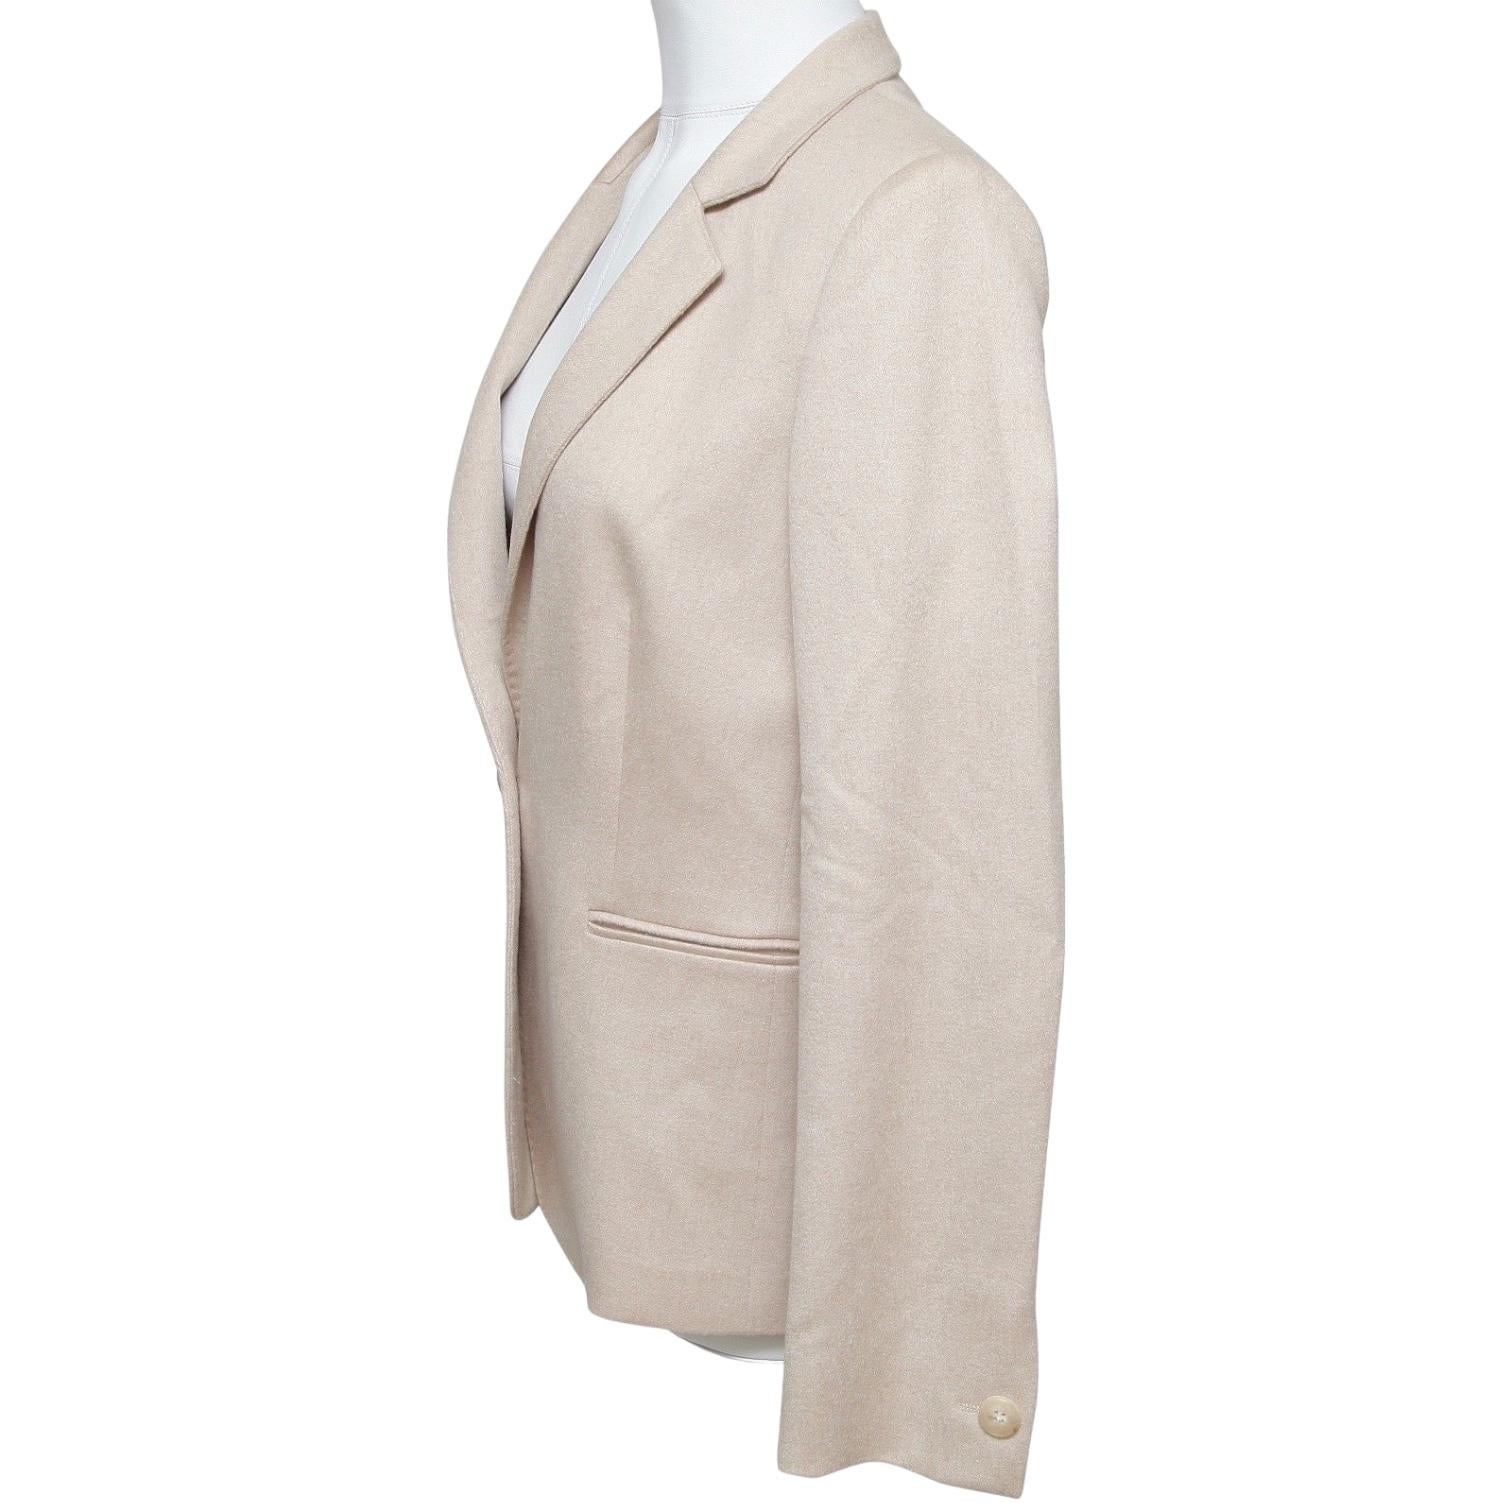 MAX MARA Blazer Jacket Camel Hair Beige Long Sleeve Sz 8 US 40 F In Good Condition For Sale In Hollywood, FL